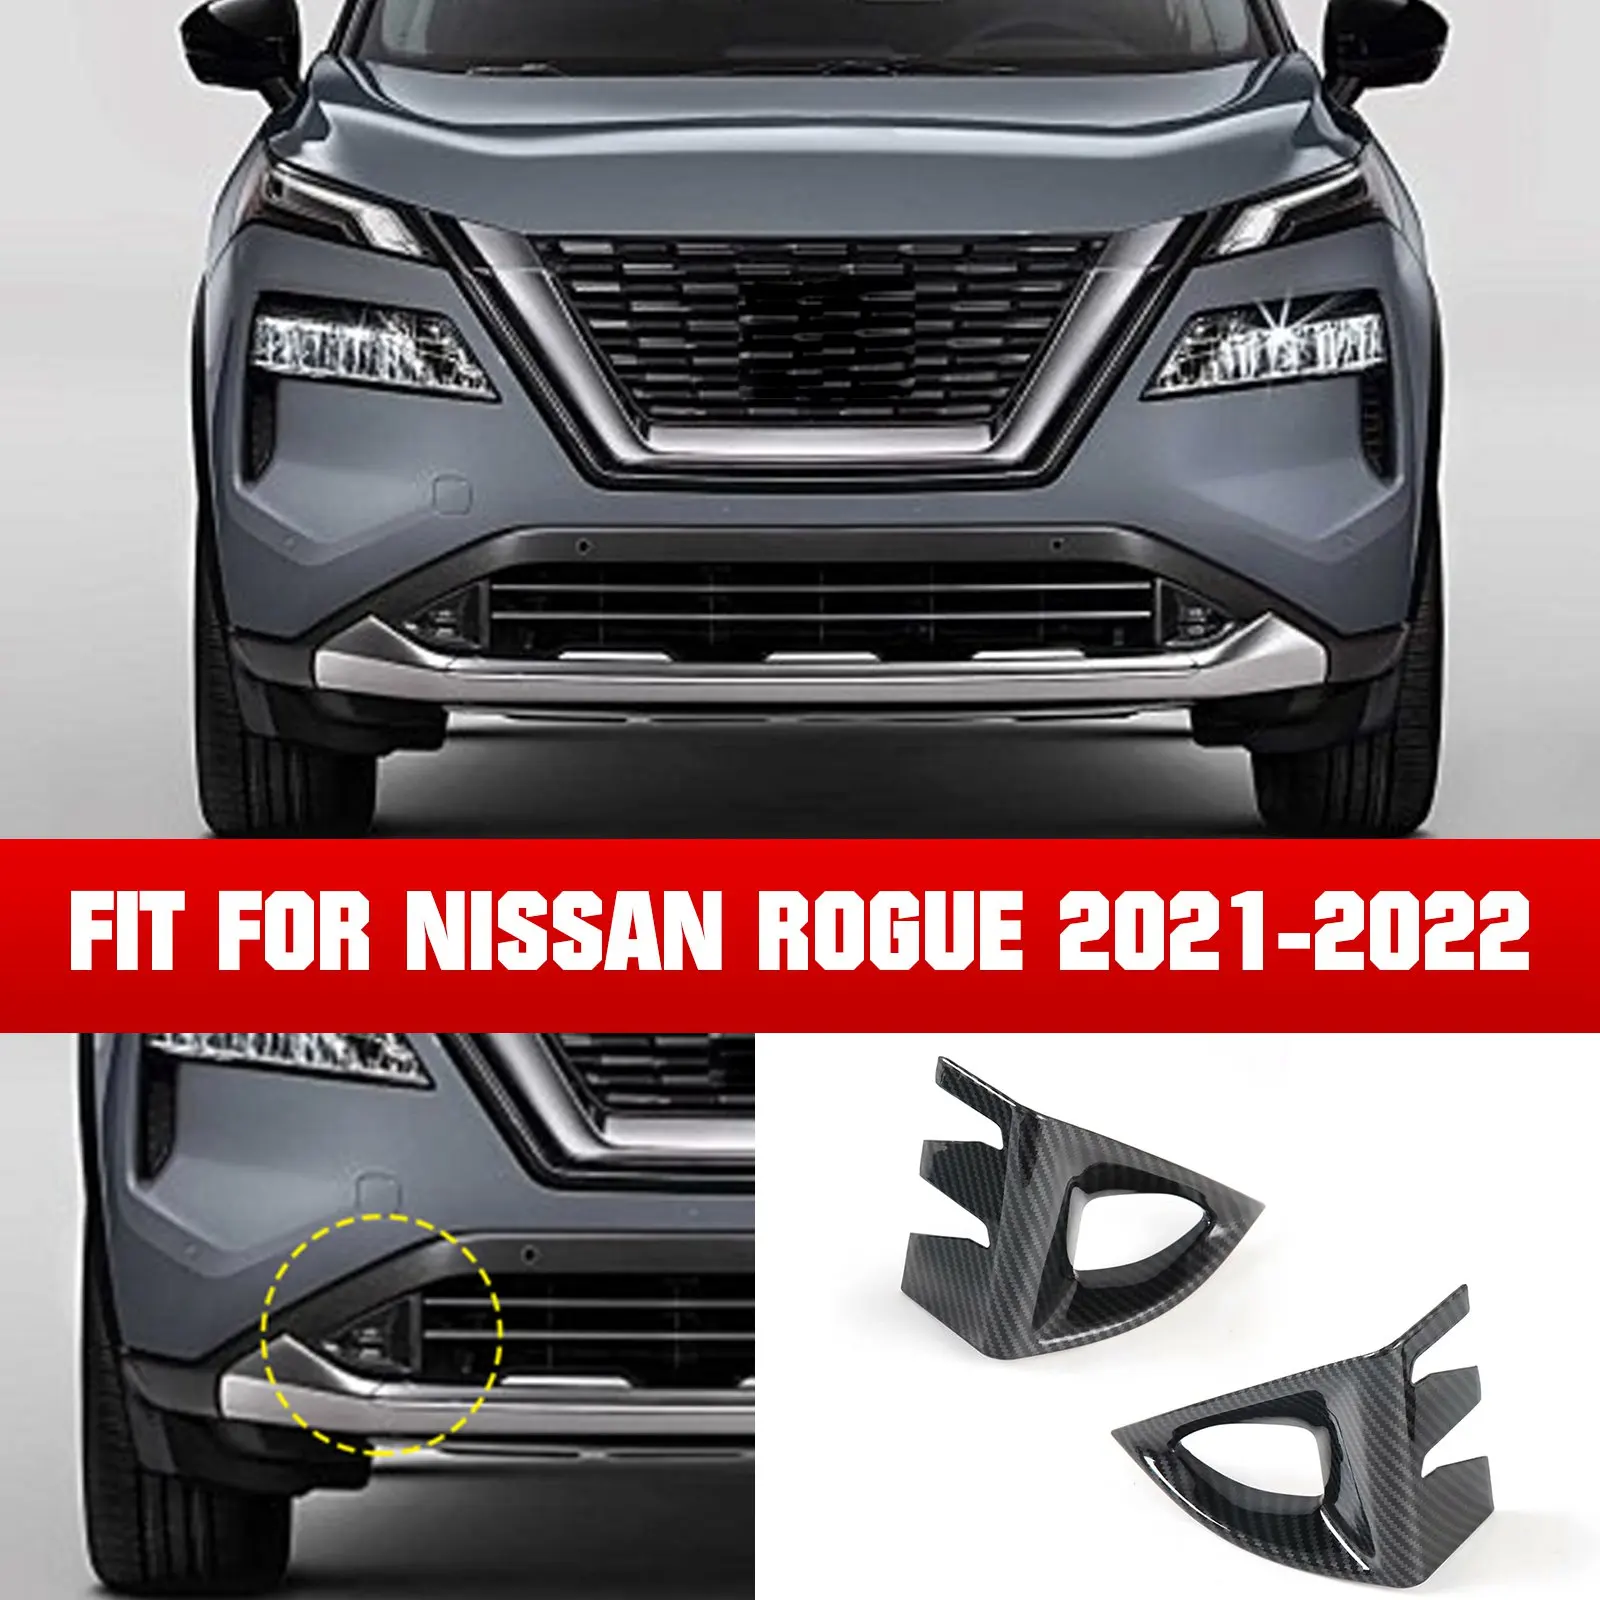 Beautost Fit for Nissan New Rogue 2021 2022 Chrome Front Lower Fog Light Lamp Cover Trims 